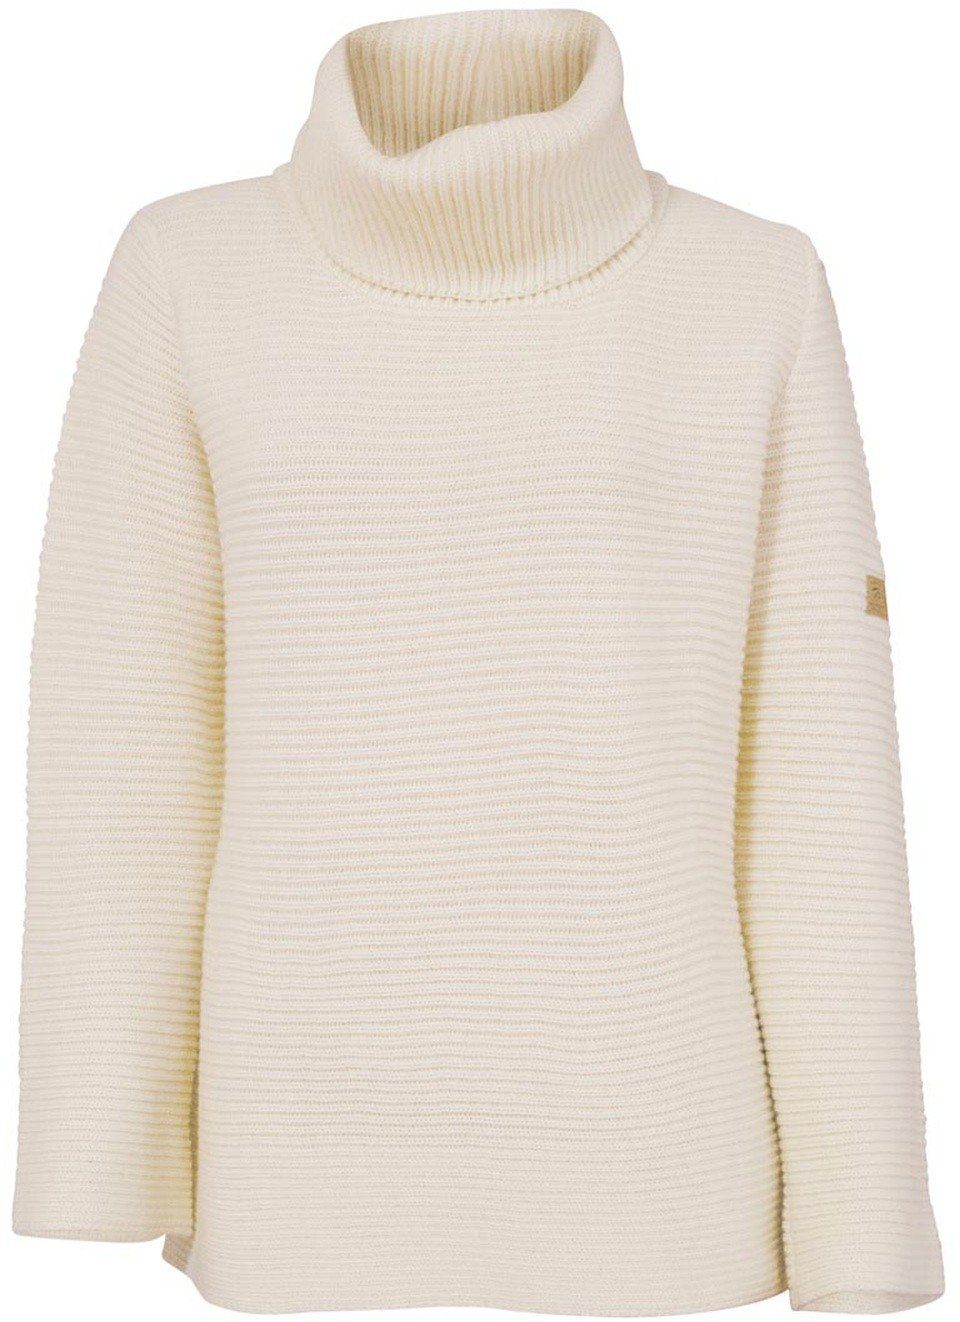 Ivanhoe of Sweden NLS white natural Holly Wollpullover